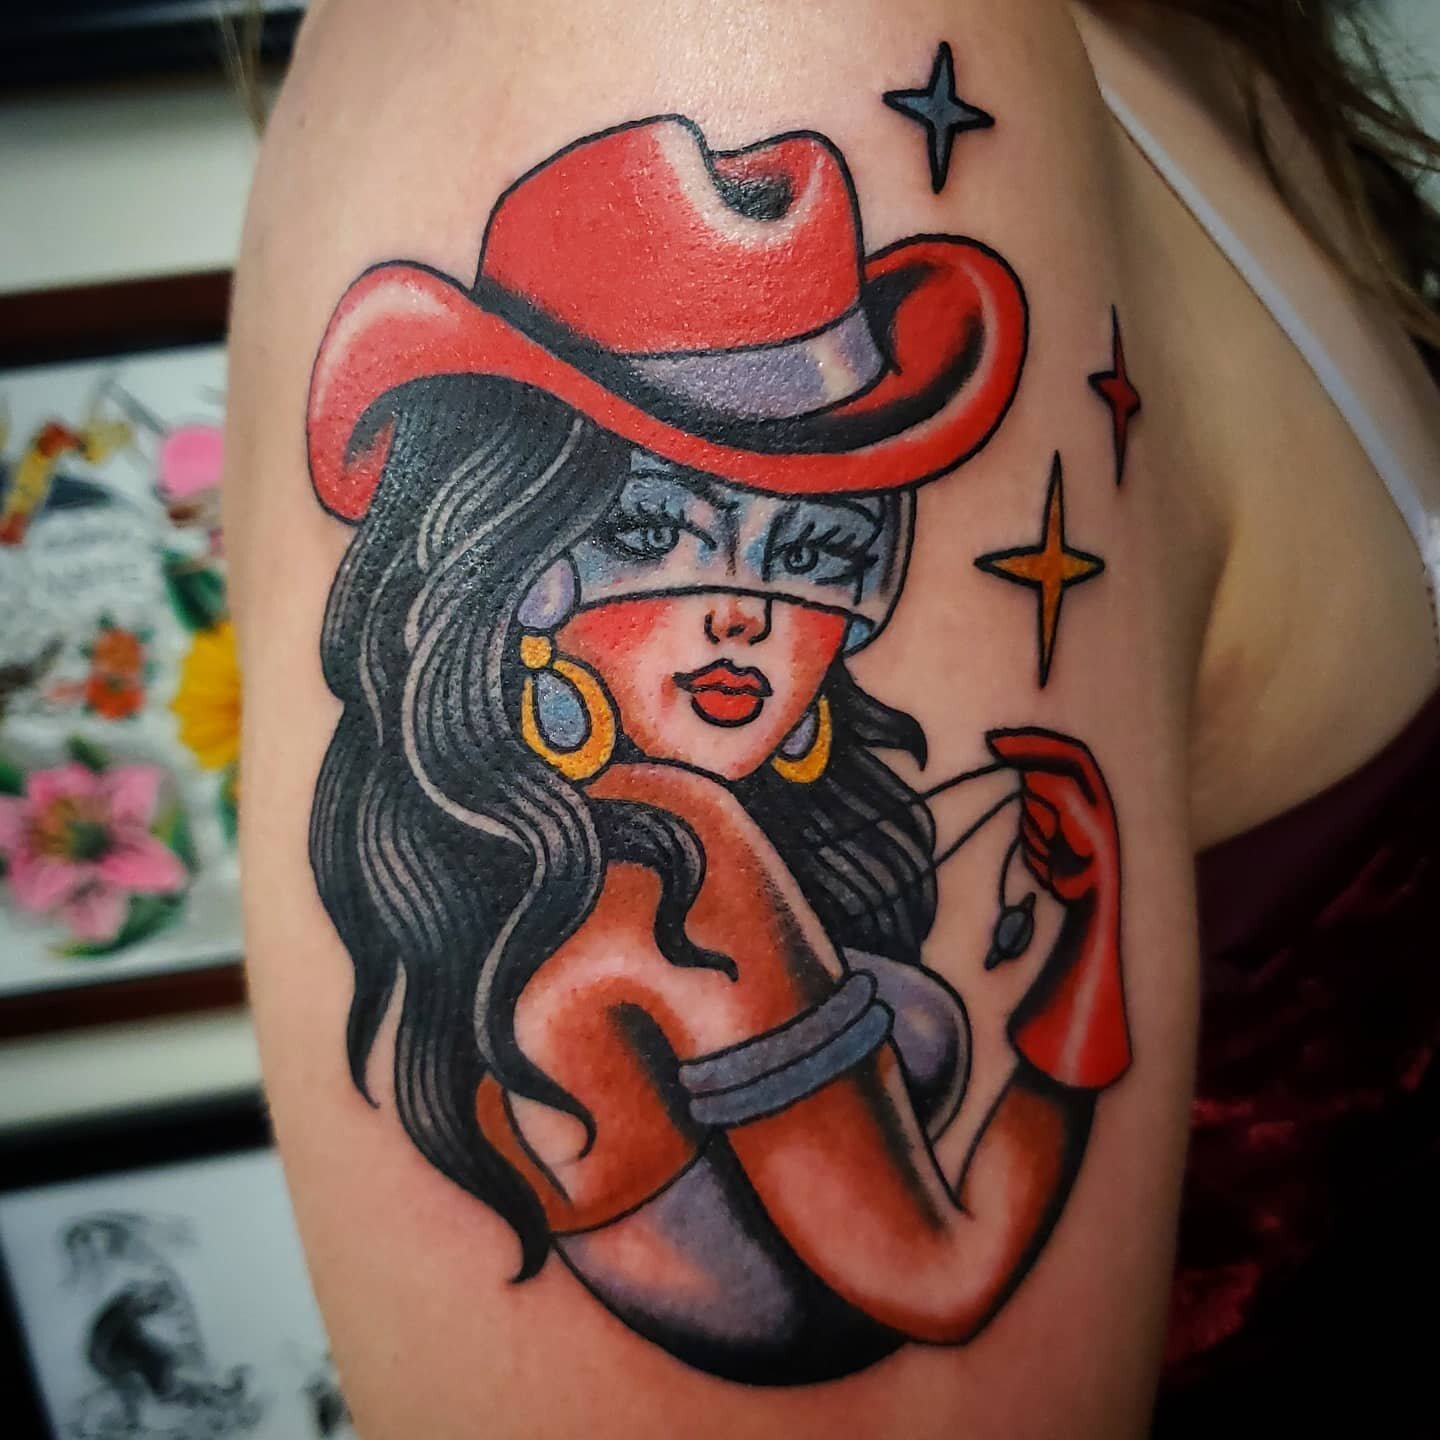 Space cowgirl by @leelkiwi
DM her diresctly to book for July!